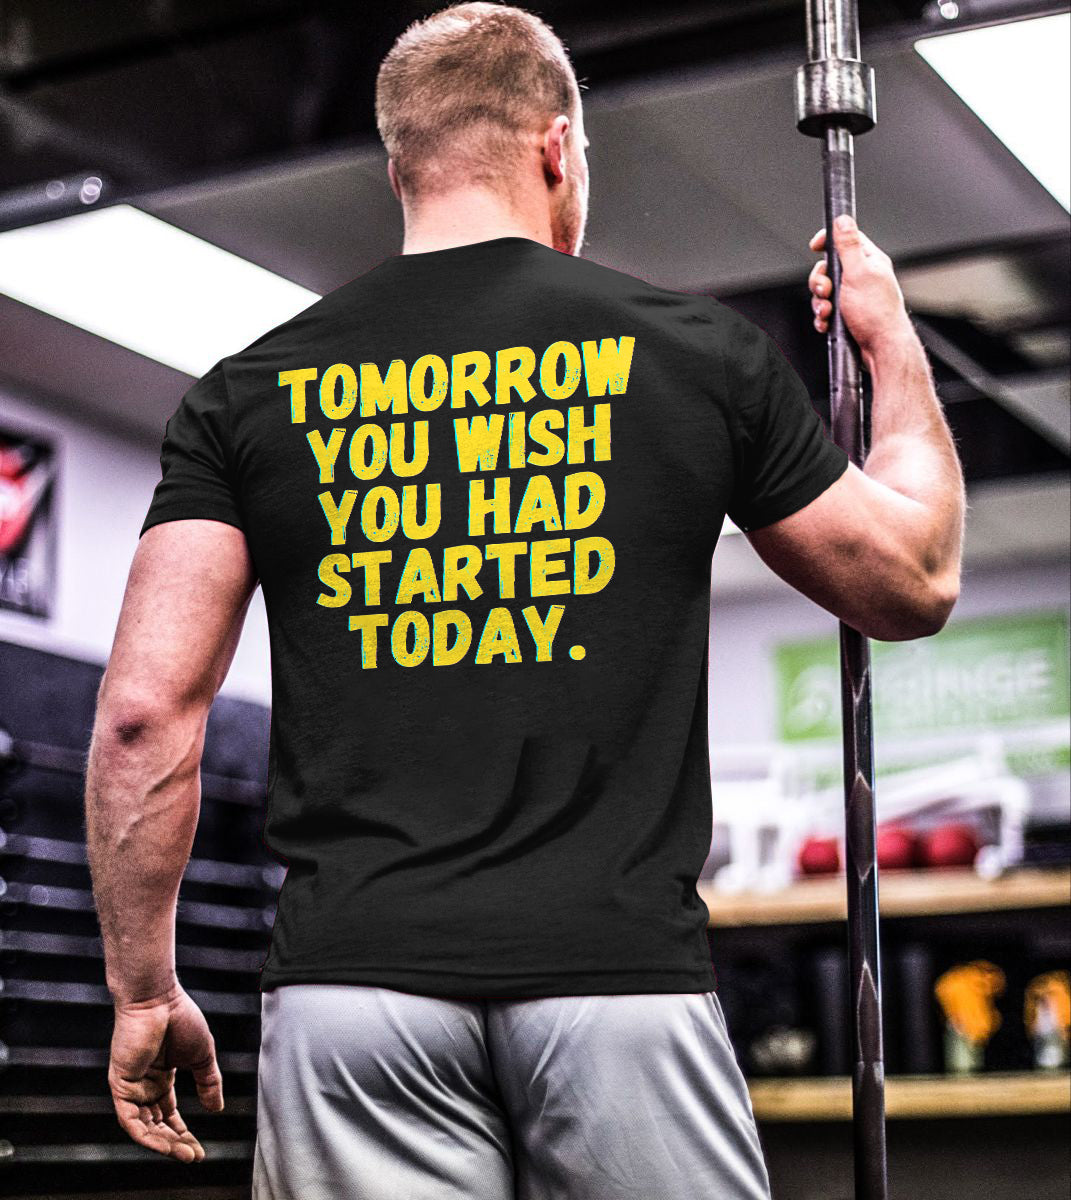 Tomorrow You Wish You Had Started Today Printed T-shirt